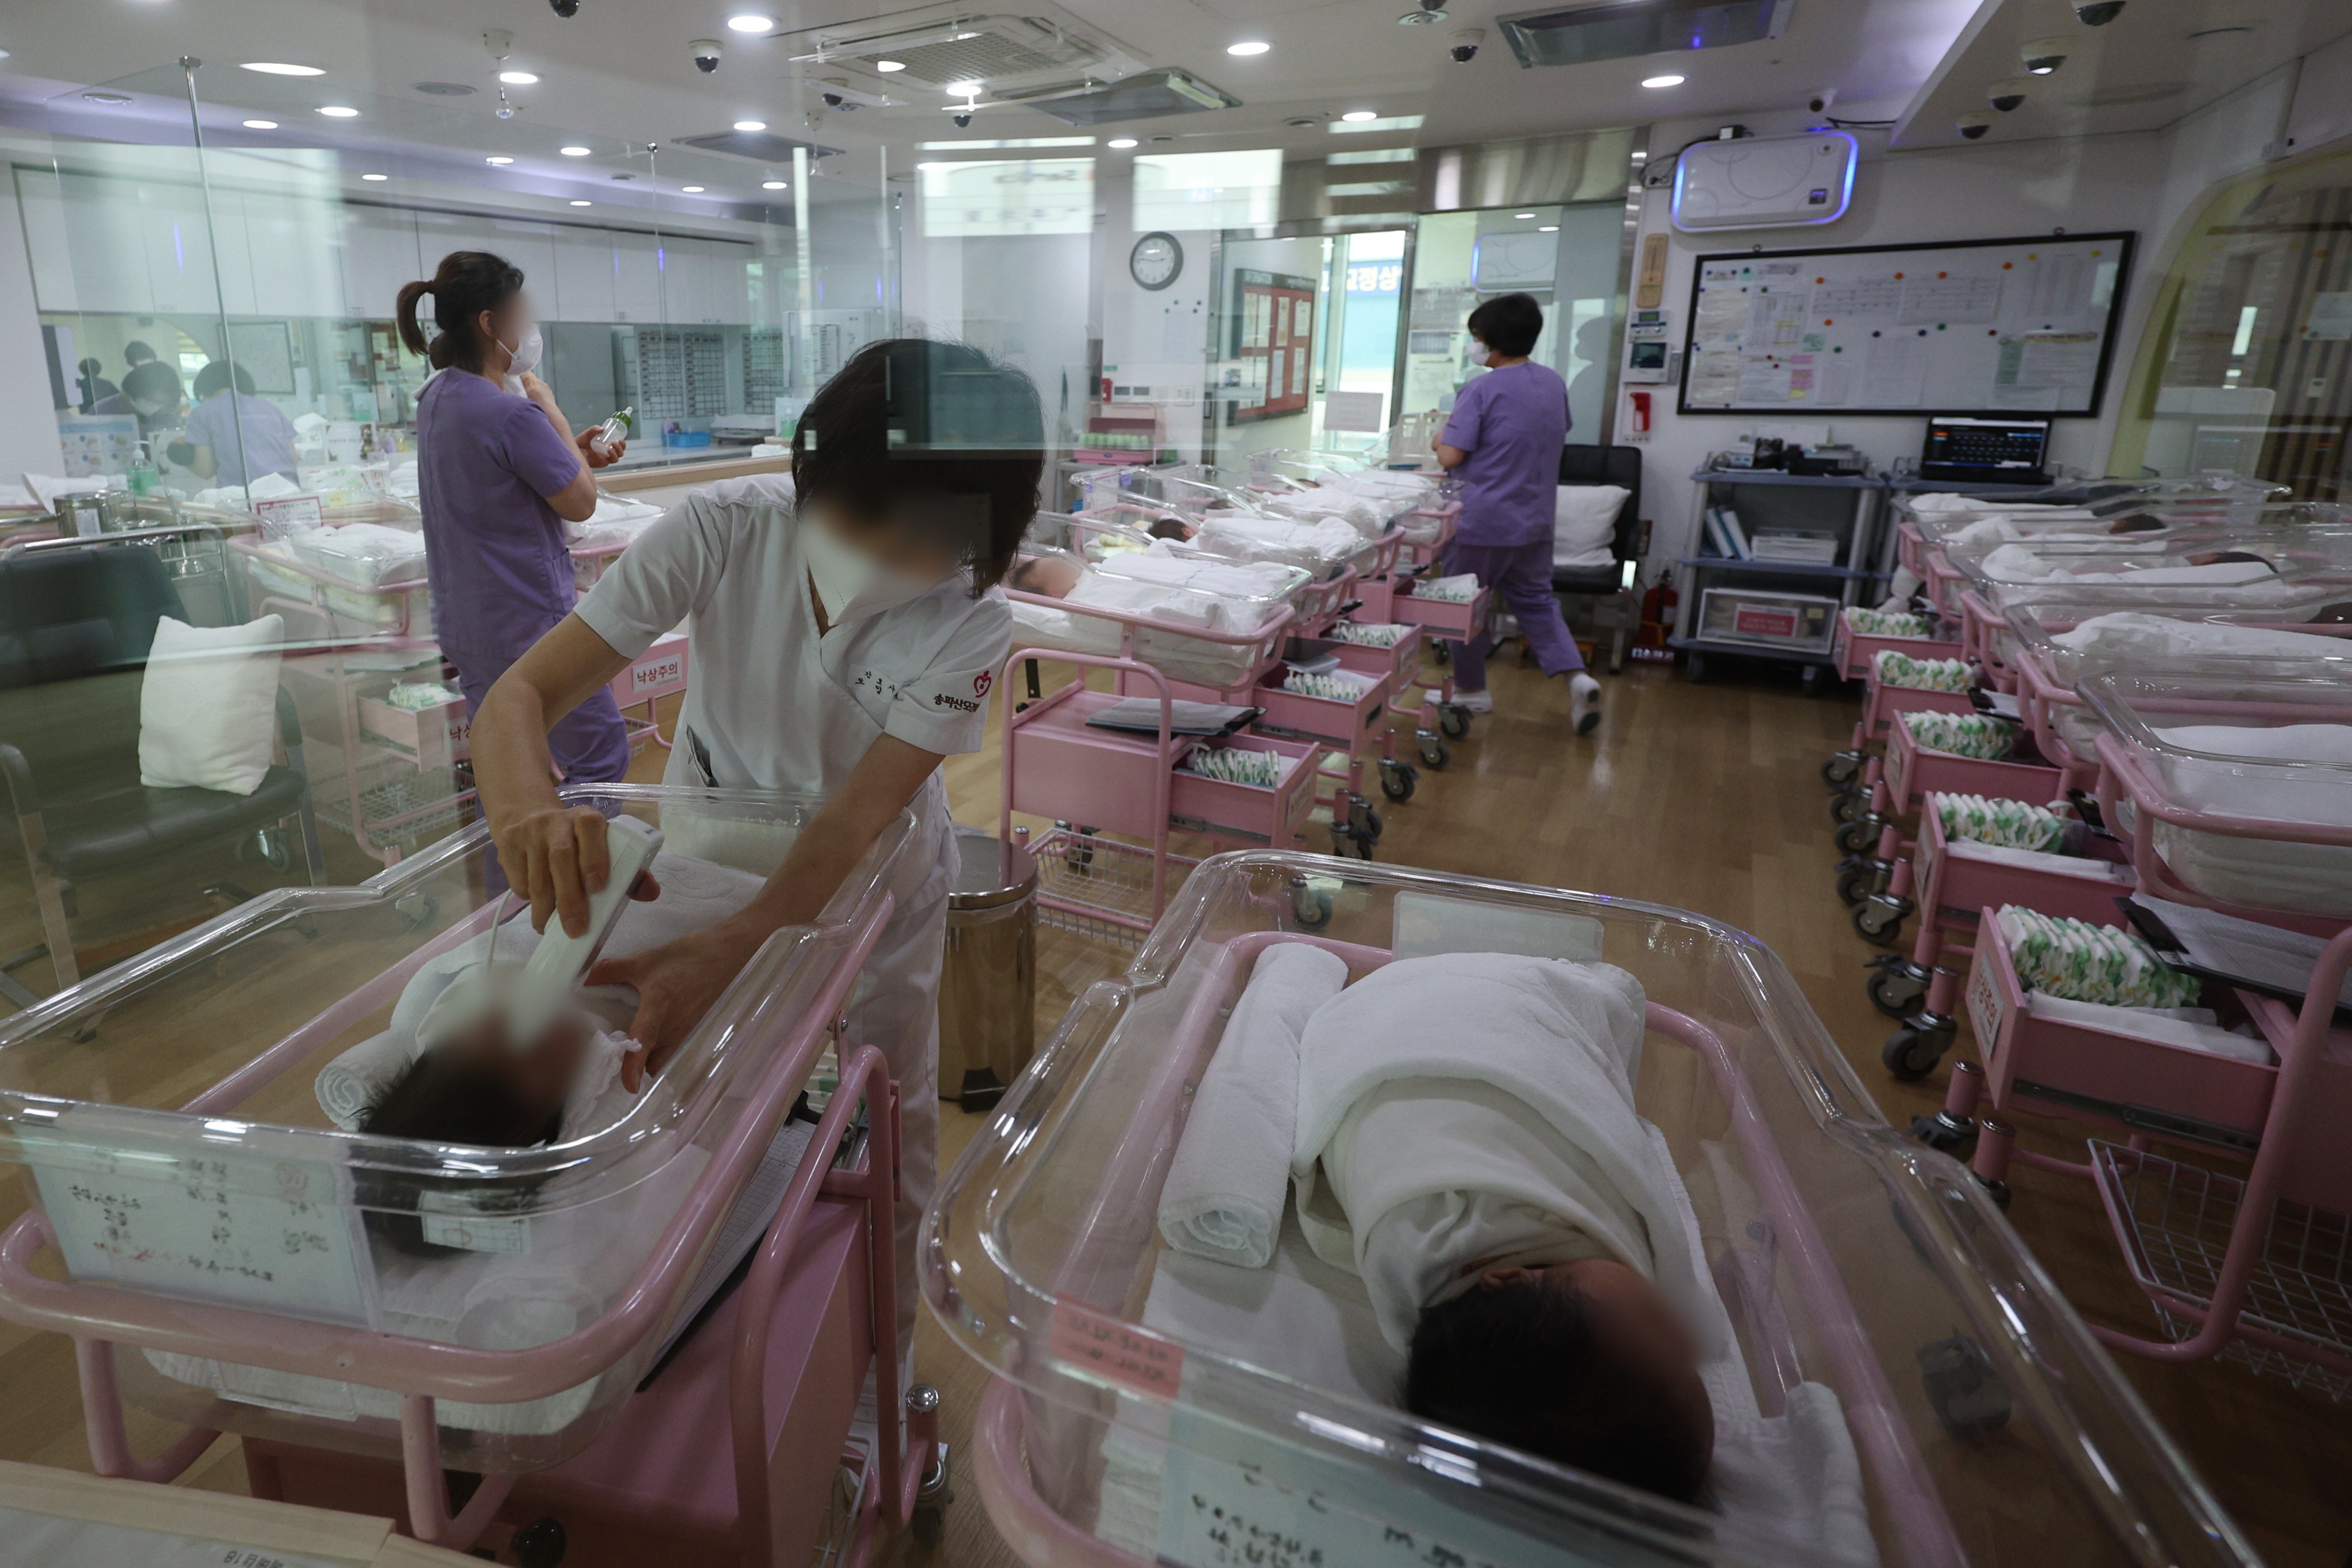 Nurses take care of babies at a postnatal care centre in Seoul, South Korea. According to a study, the population of three quarters of all countries will be shrinking by 2050. Photo: EPA-EFE/Yonhap